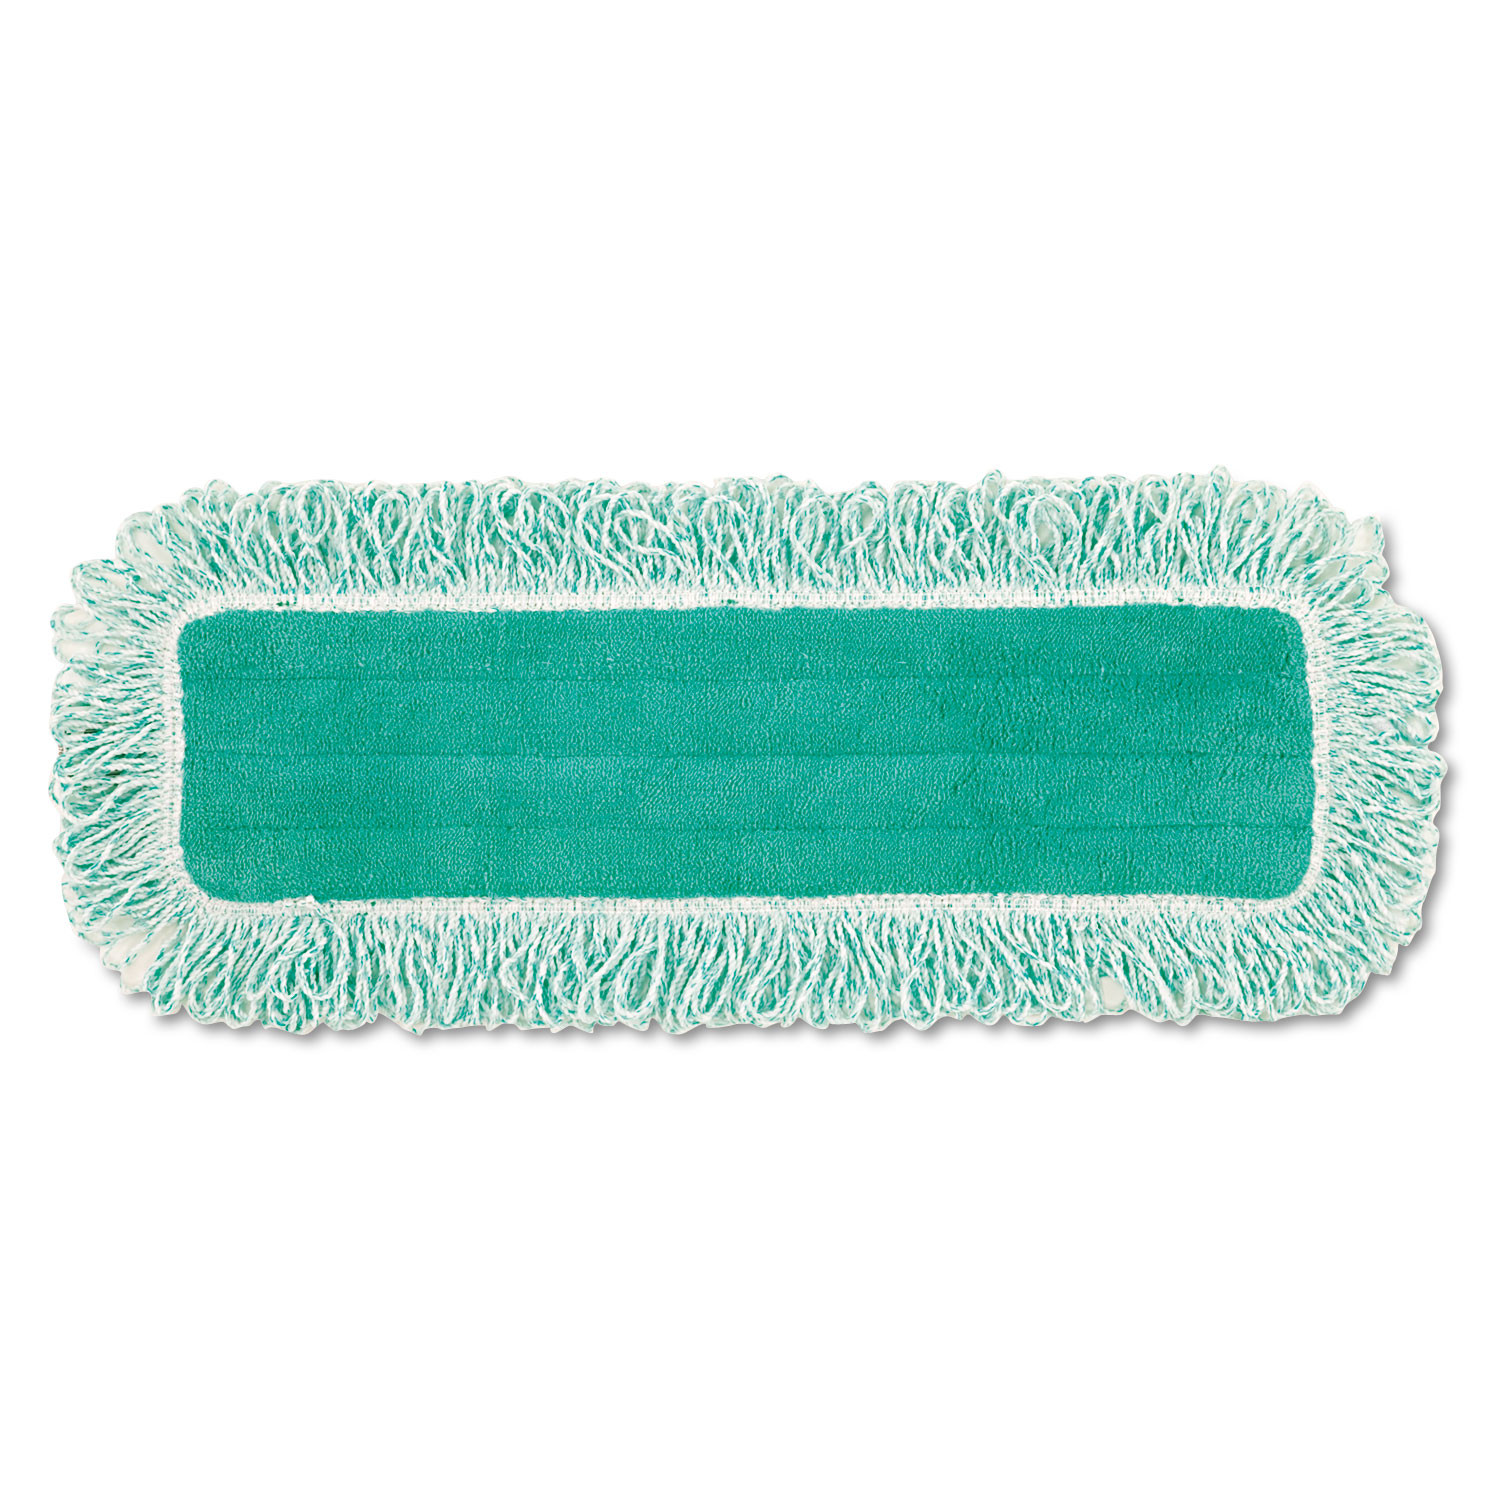 Dust Pad with Fringe, Microfiber, 18" Long, Green